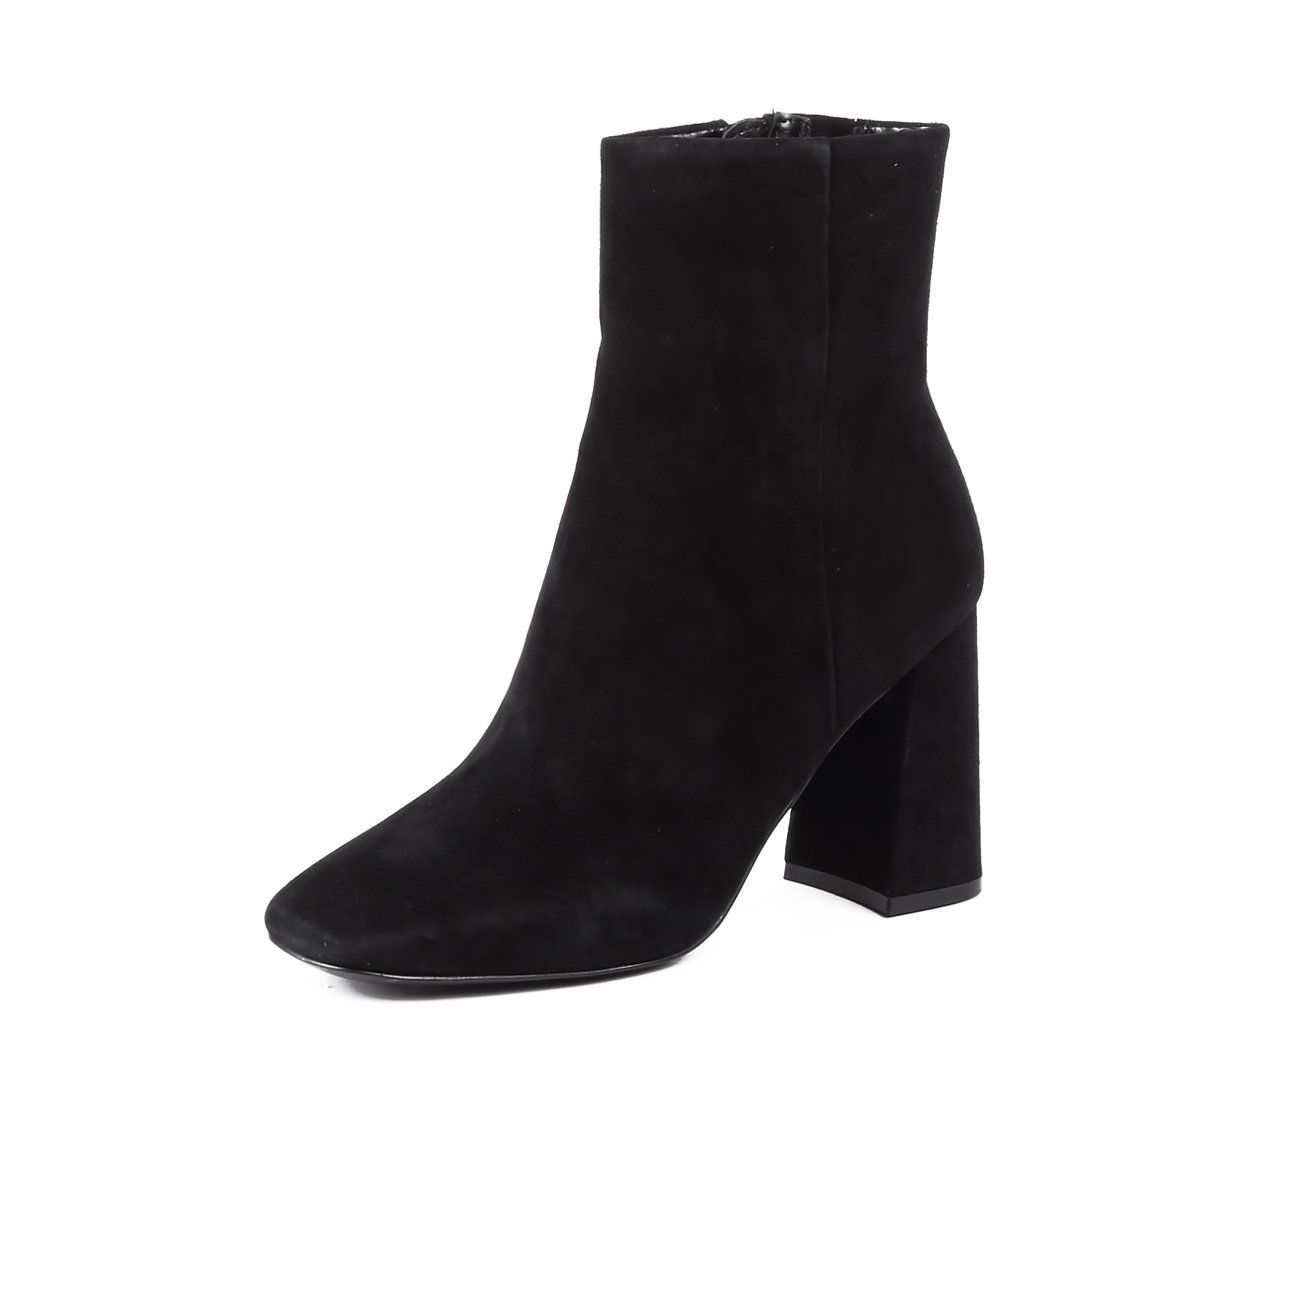 MADDEN EMBRY ANKLE BOOTS Woman Black suede Mascheroni